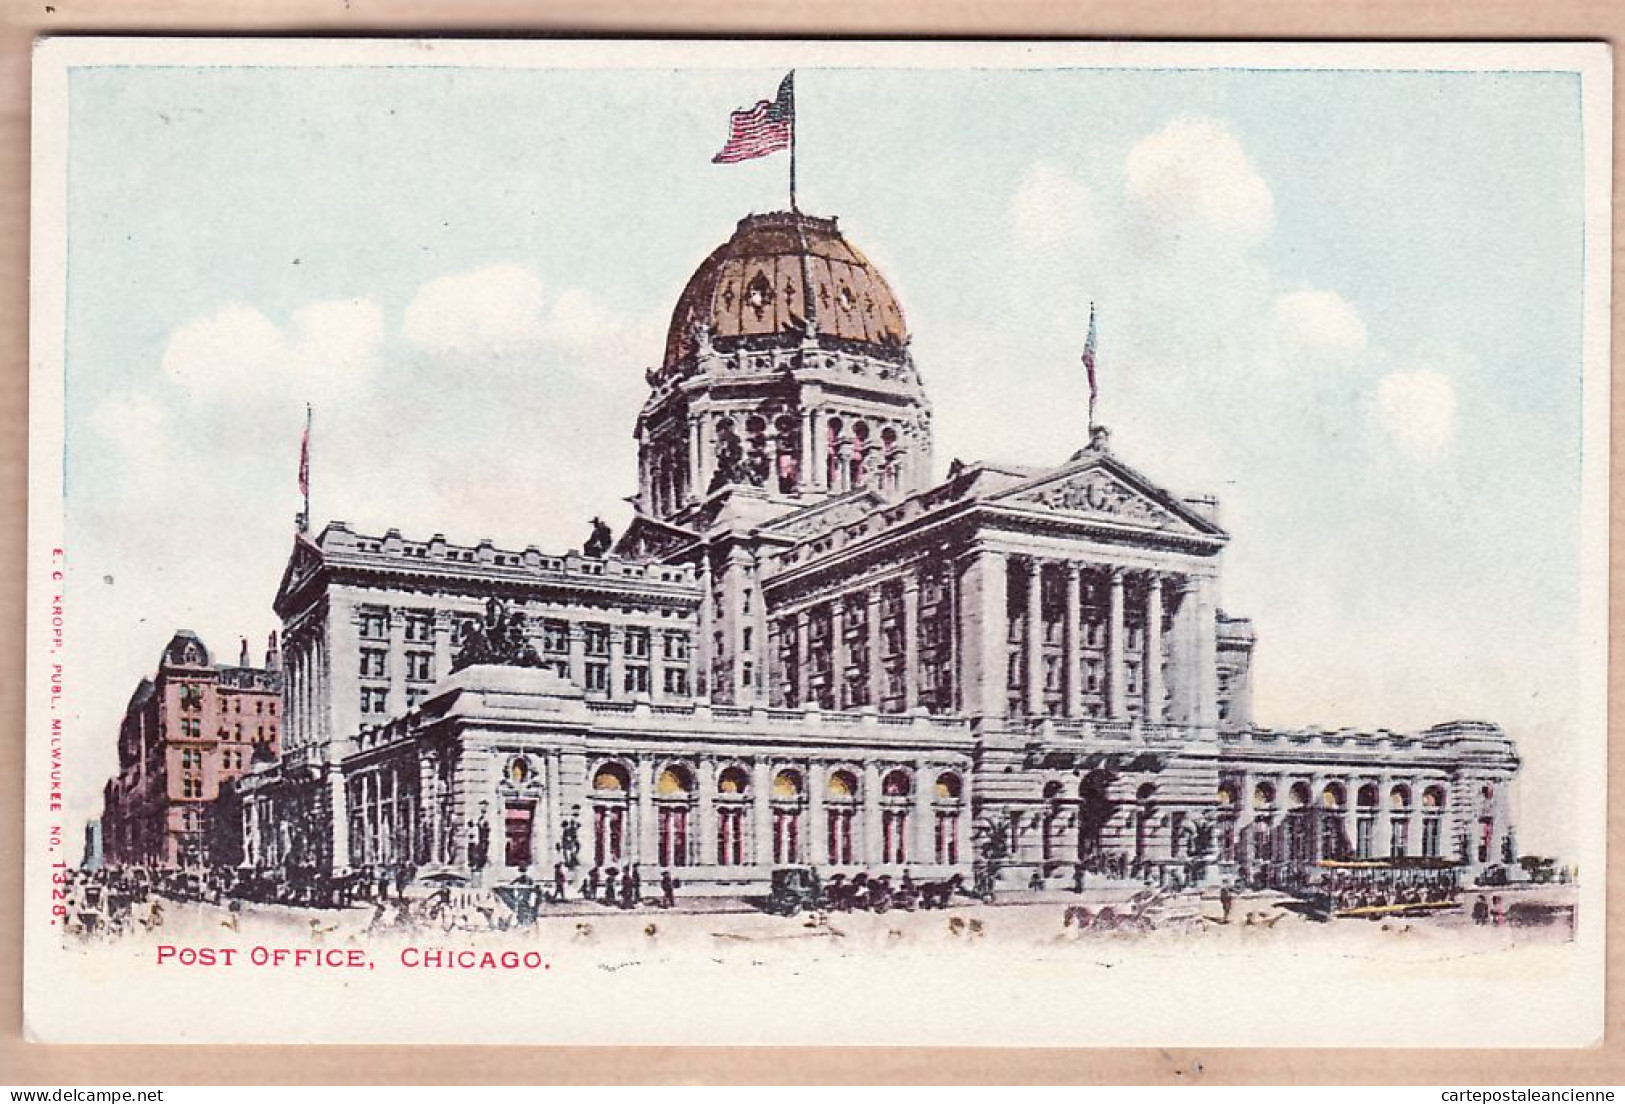 01671 / Post-Office CHICAGO Illinois 1900-1910s Published KROPP MILWAUKEE N°1328  - Chicago